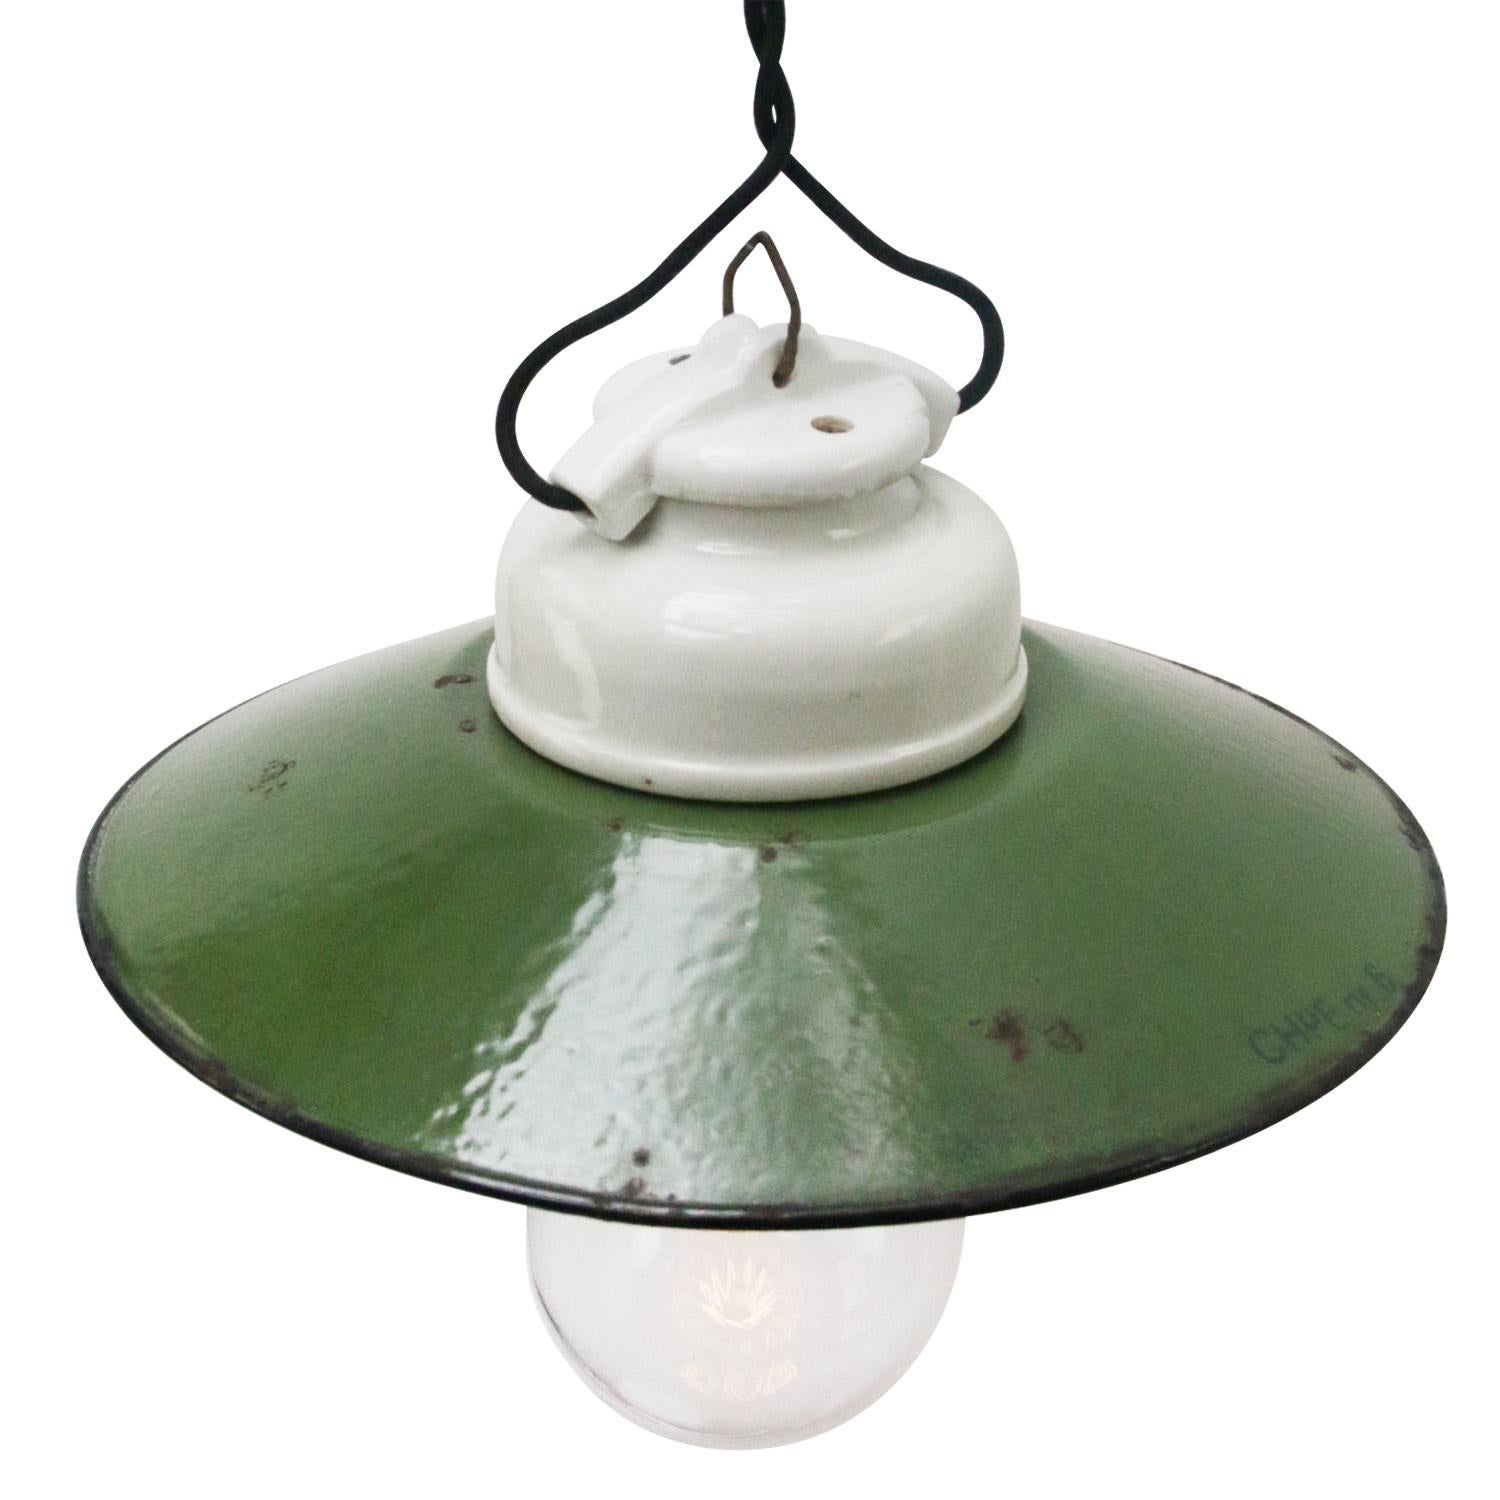 Porcelain industrial hanging lamp.
White porcelain and clear glass.
Enamel shade
2 conductors, no ground.

Weight: 1.30 kg / 2.9 lb

Priced per individual item. All lamps have been made suitable by international standards for incandescent